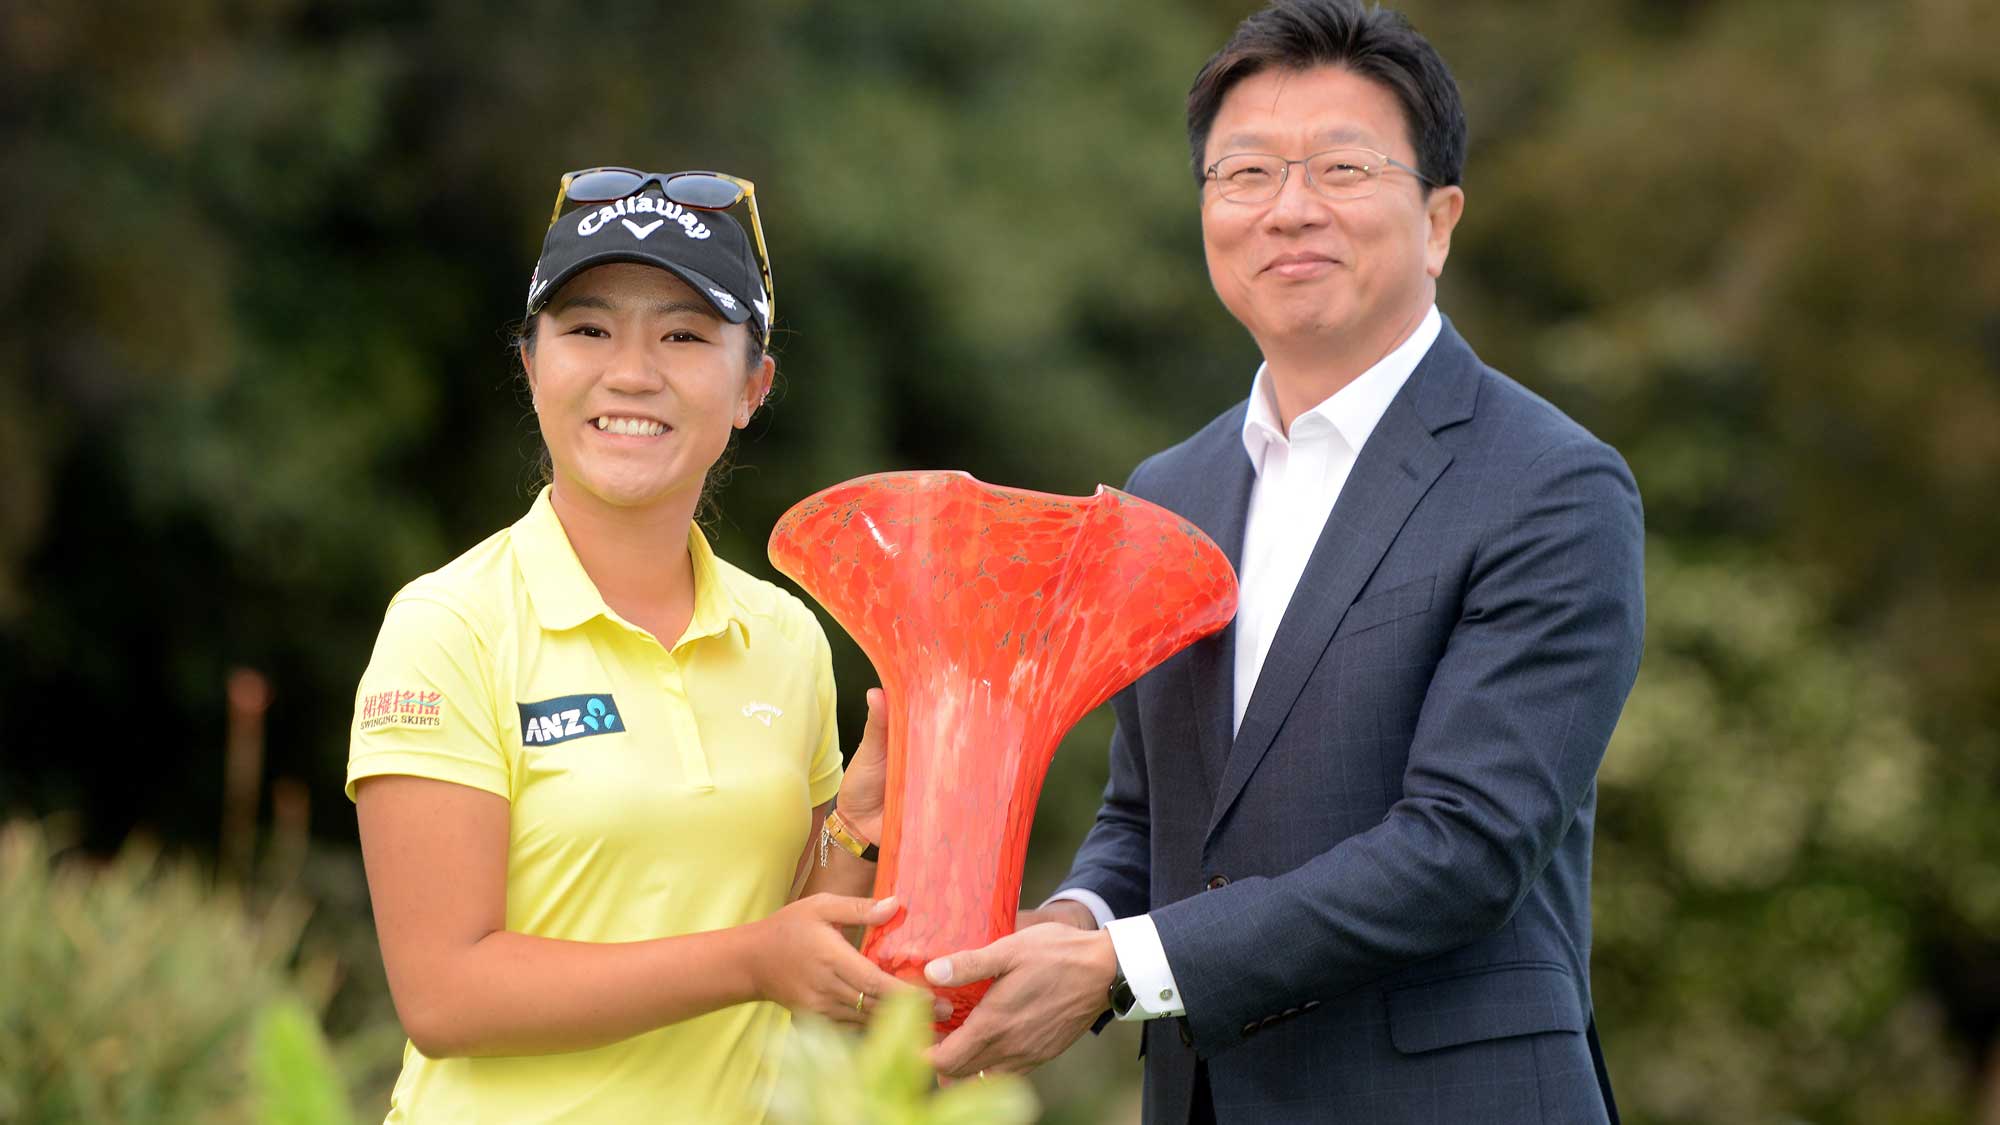 Lydia Ko of New Zealand holds the winners trophy with President and CEO of North American KIA Jang Won Sohn after her -19 under victory during the final round of the KIA Classic